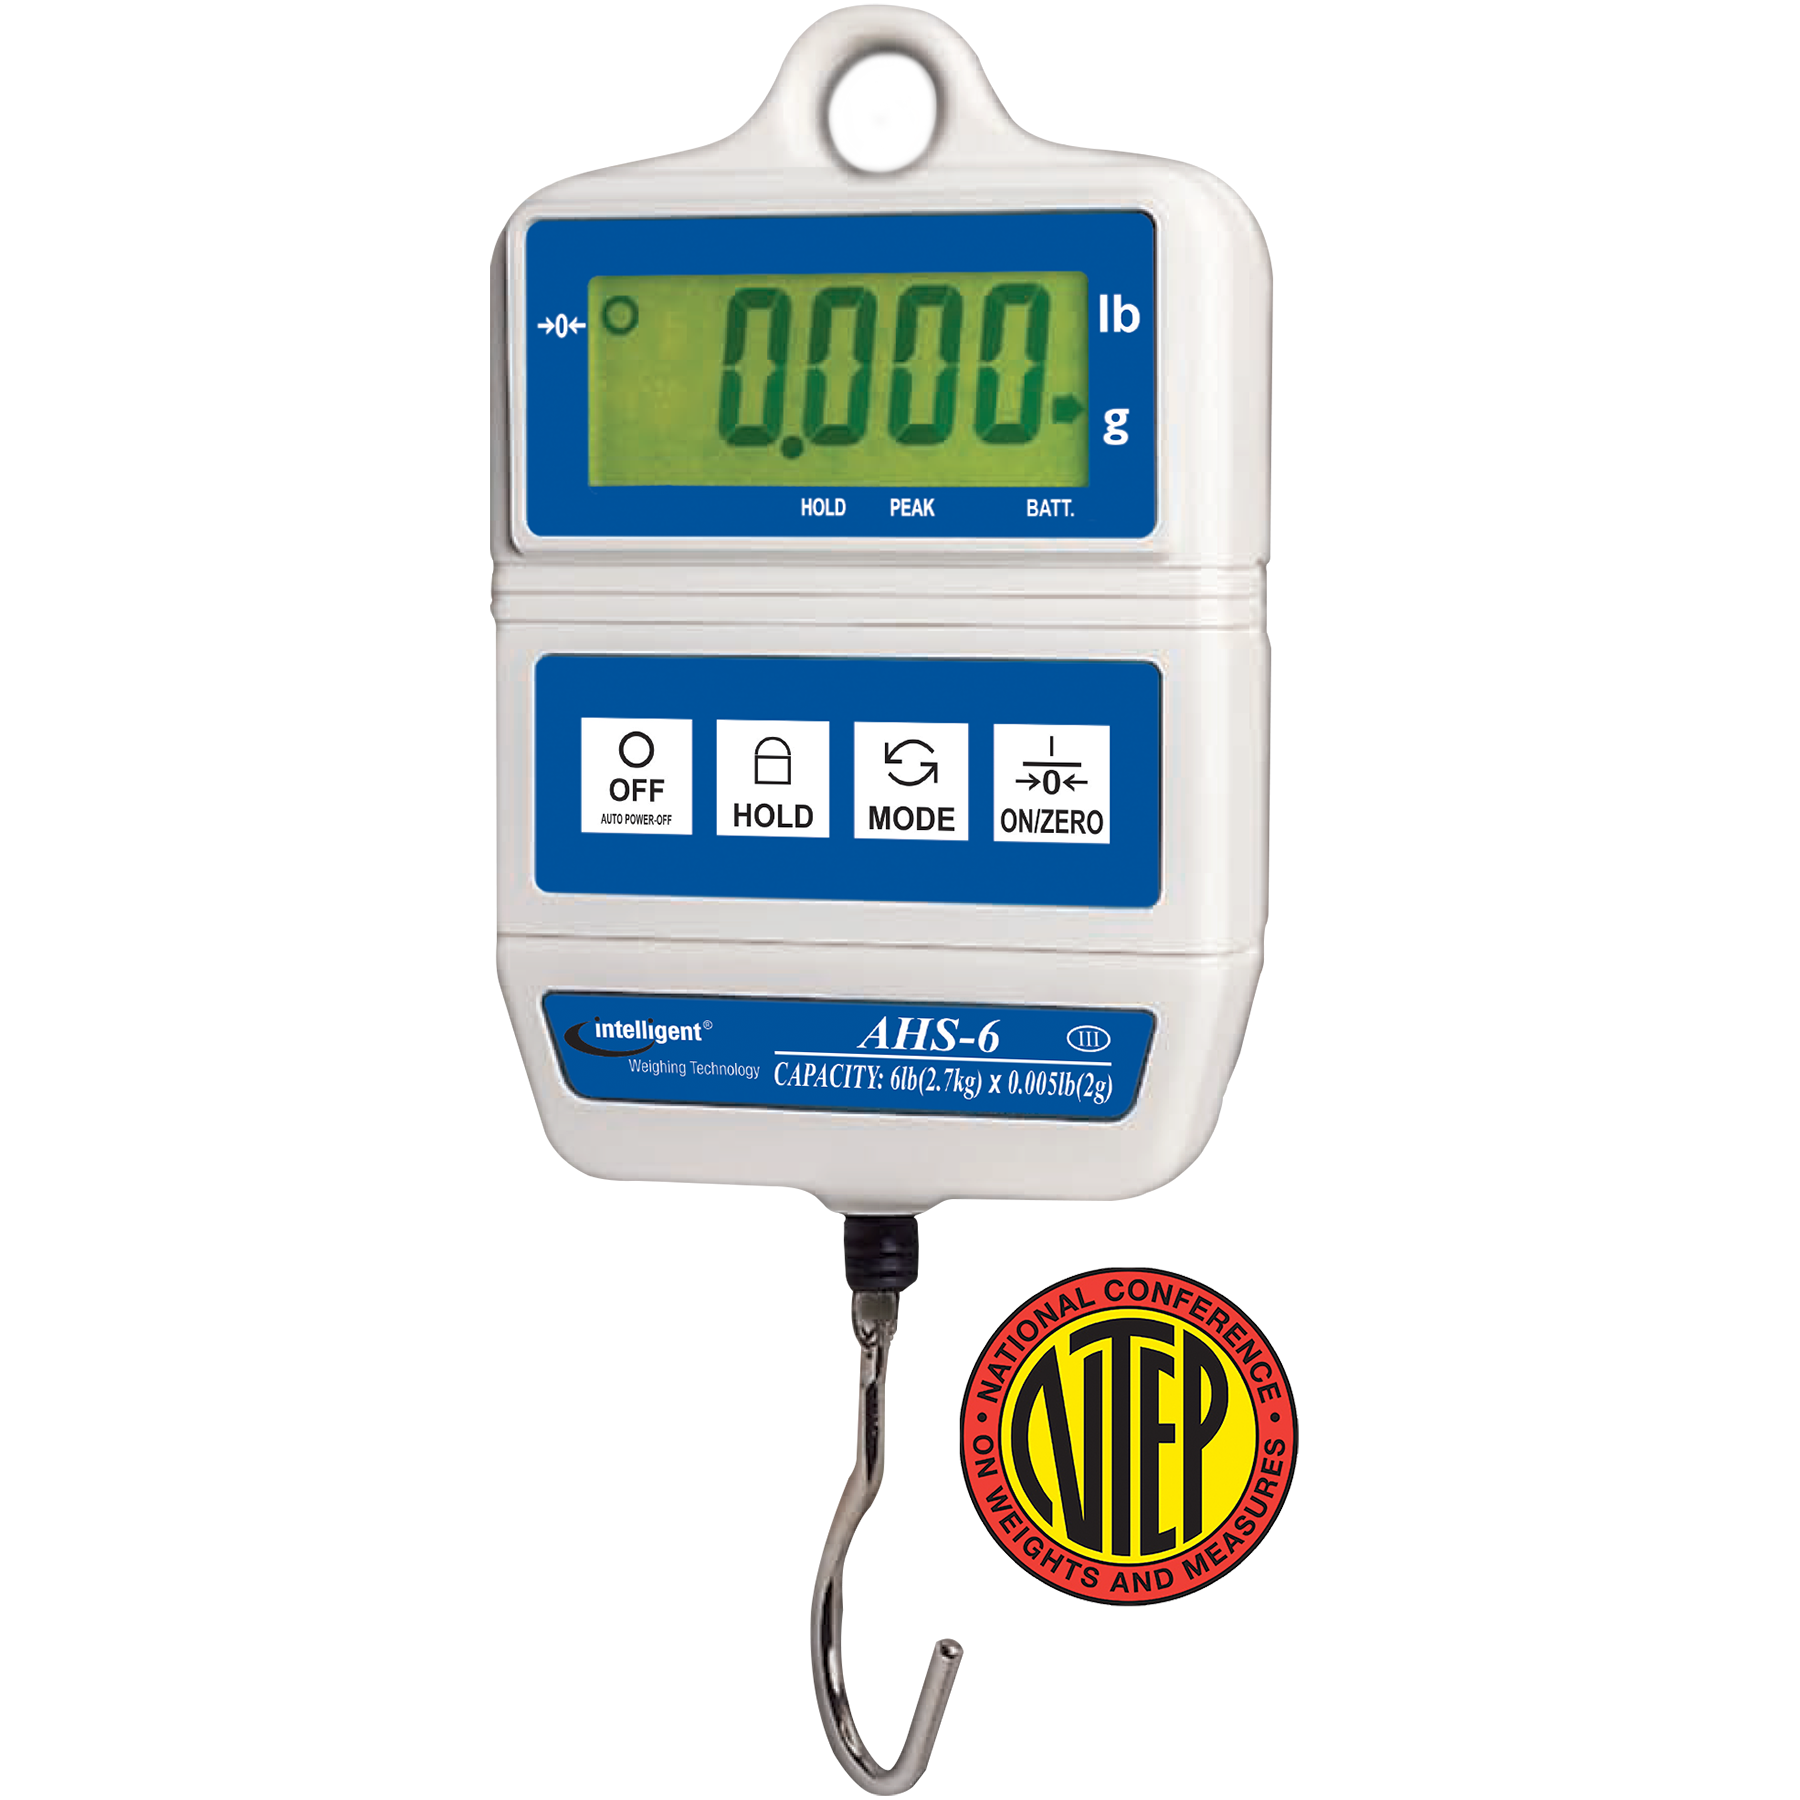 Detecto - T3530 - Hanging Dial Scale